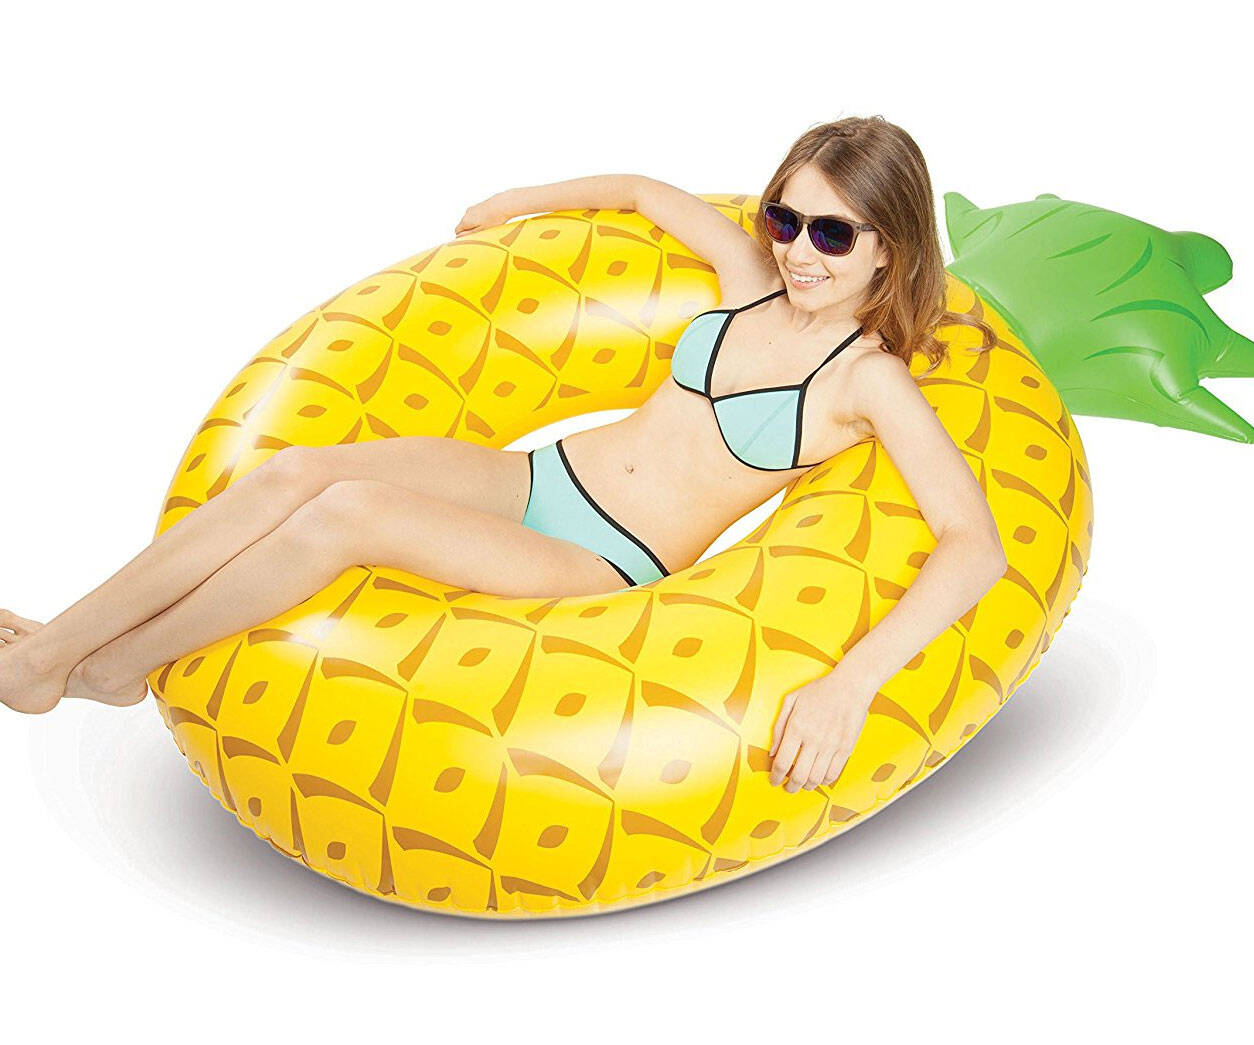 Giant Pineapple Pool Float - //coolthings.us